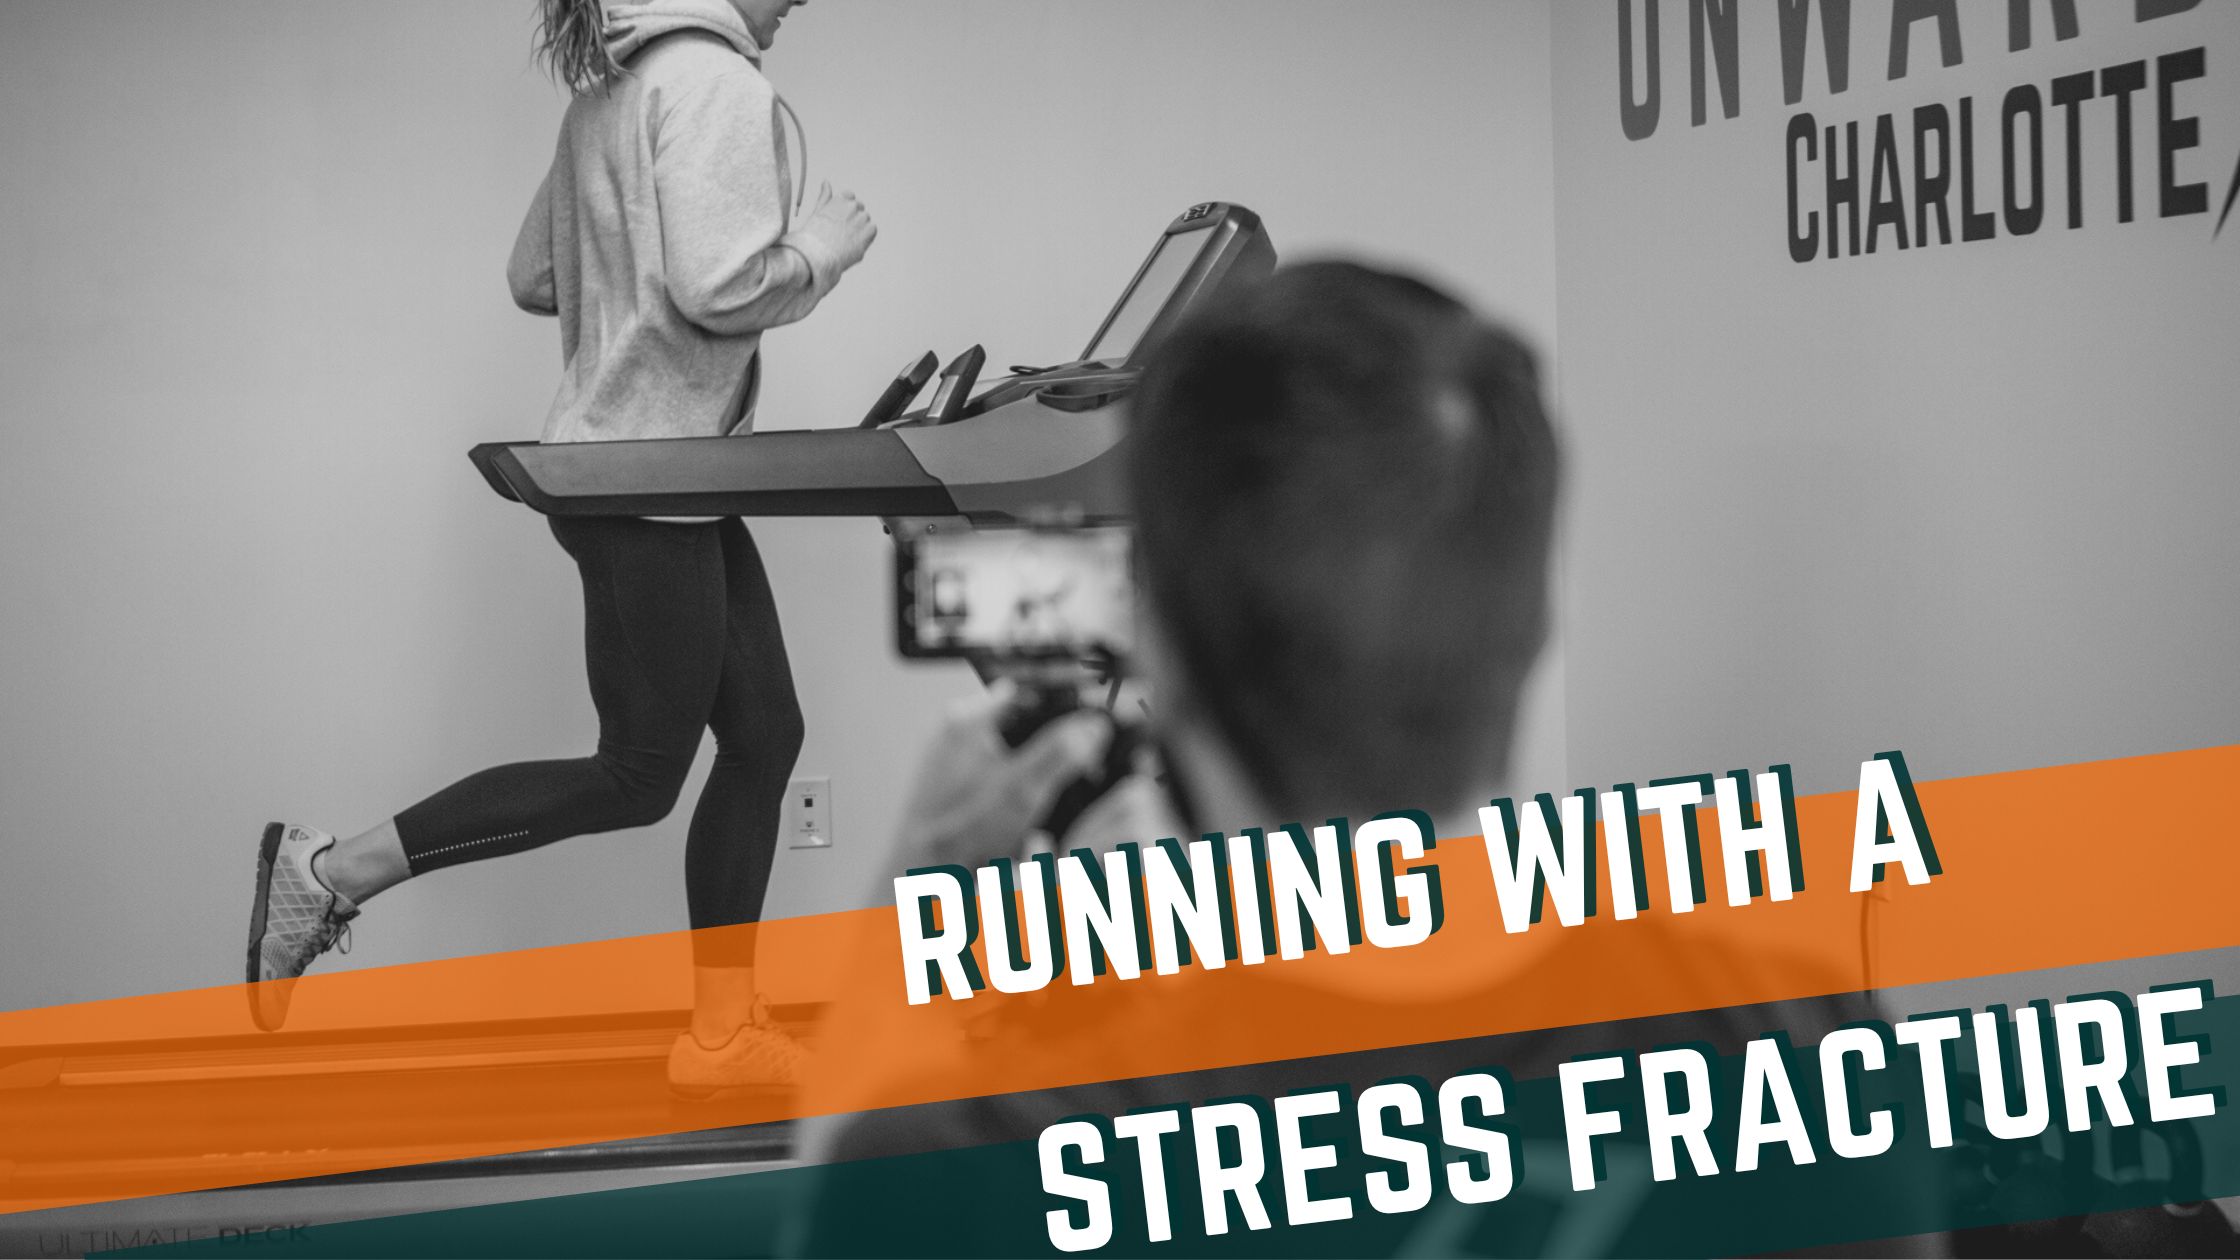 Are you running with a stress fracture?